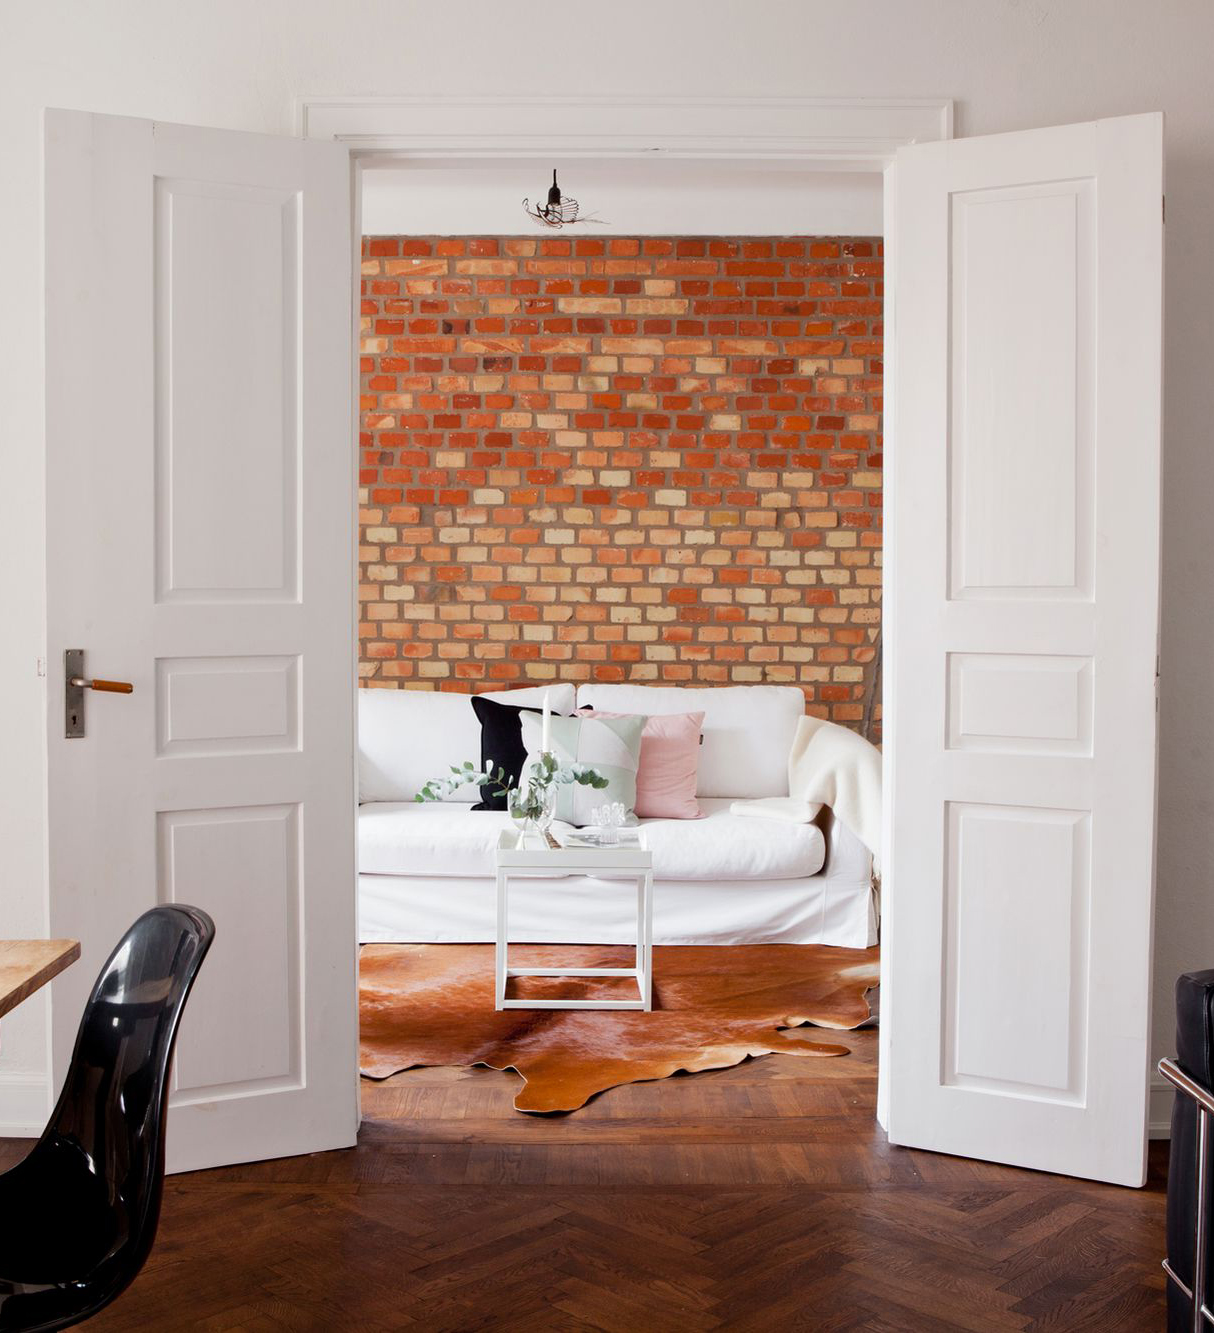 Living Room With Exposed Brick Wall (16)